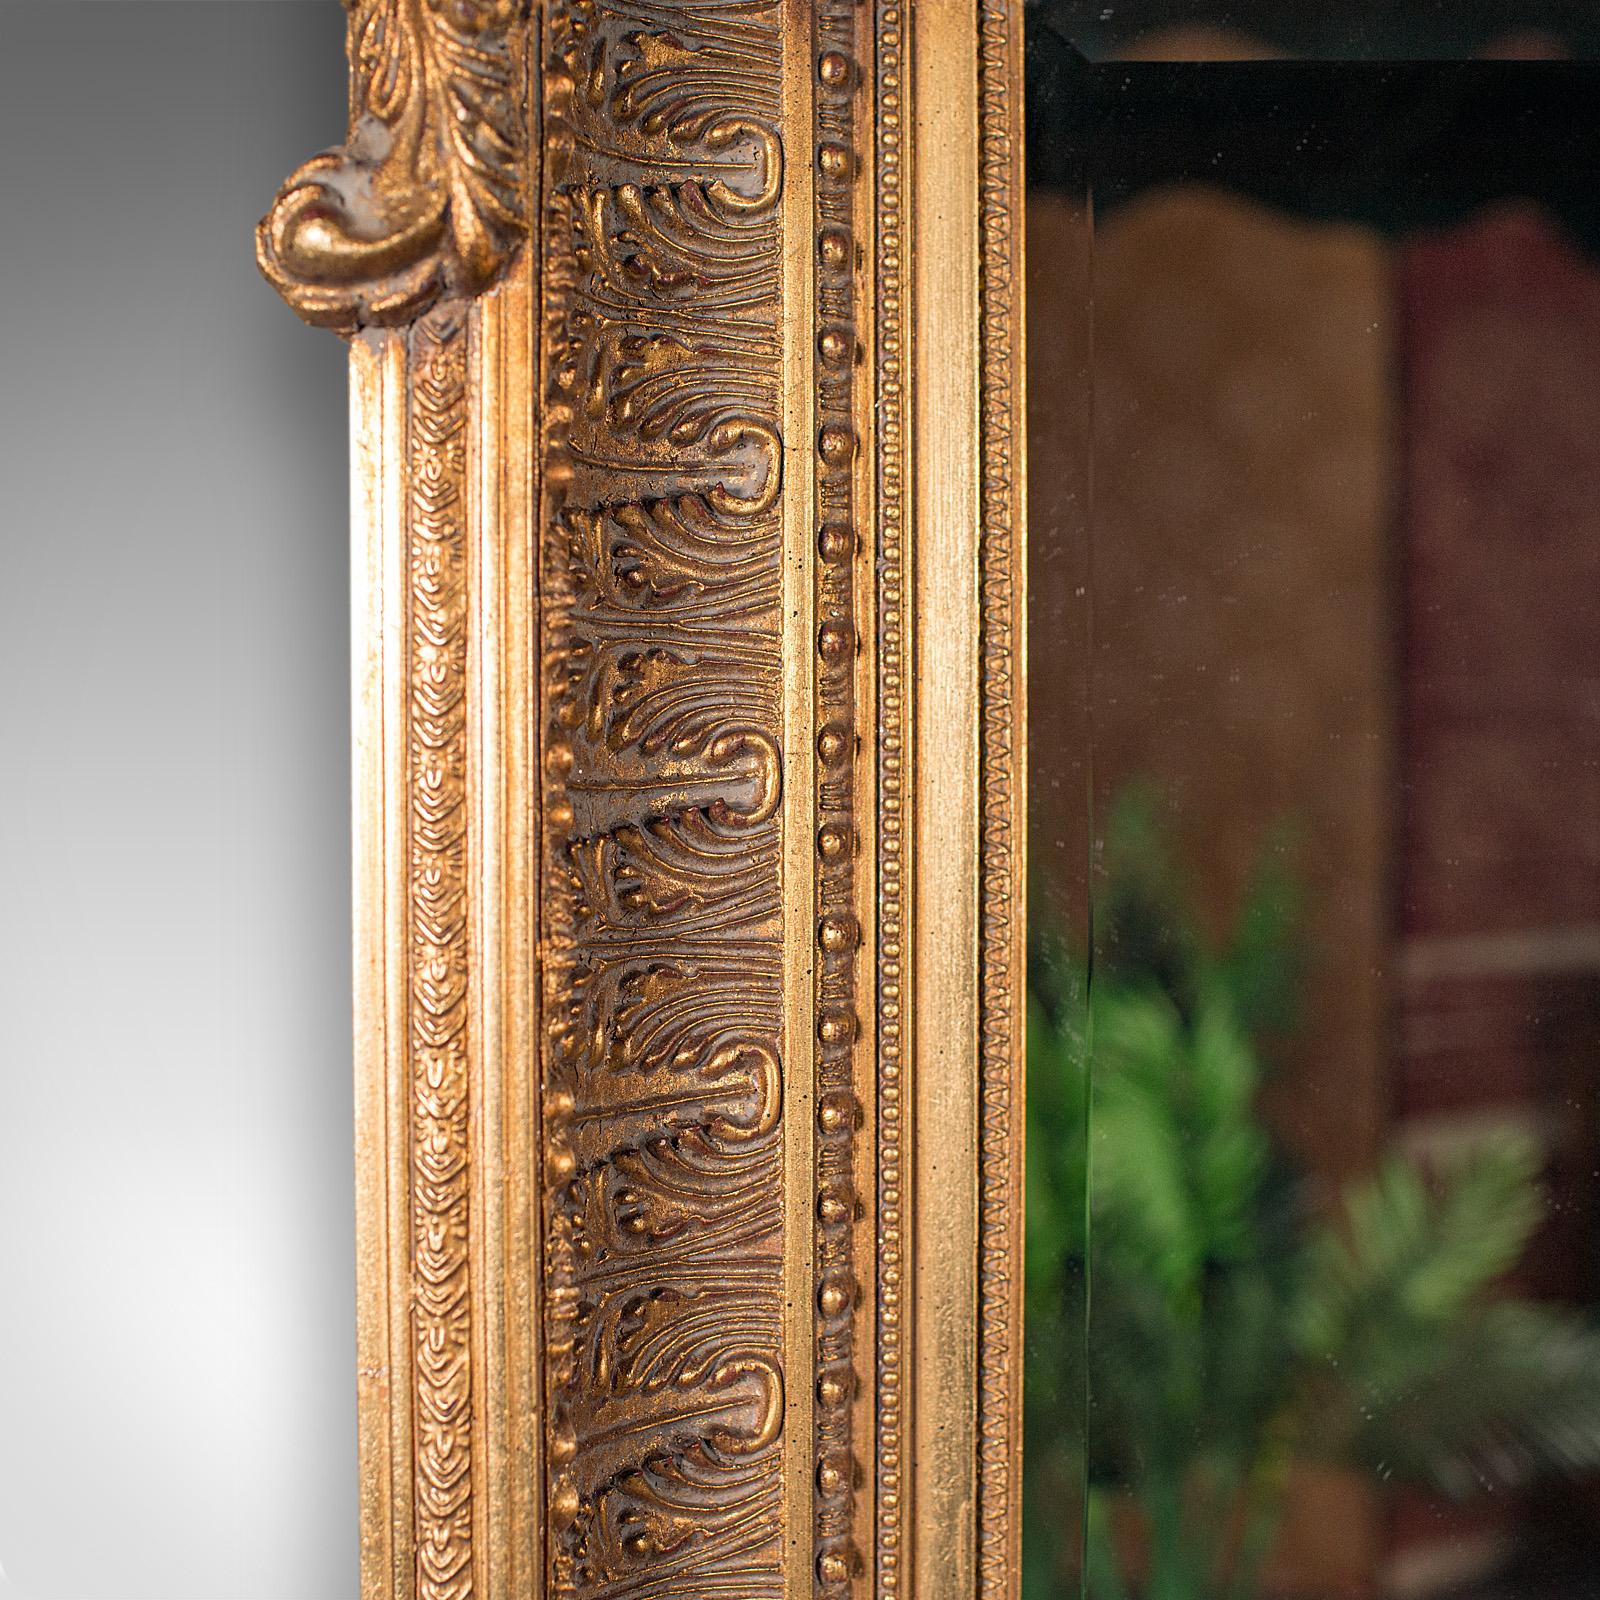 Glass Large Vintage Renaissance Revival Wall Mirror, Continental, Giltwood, Decorative For Sale